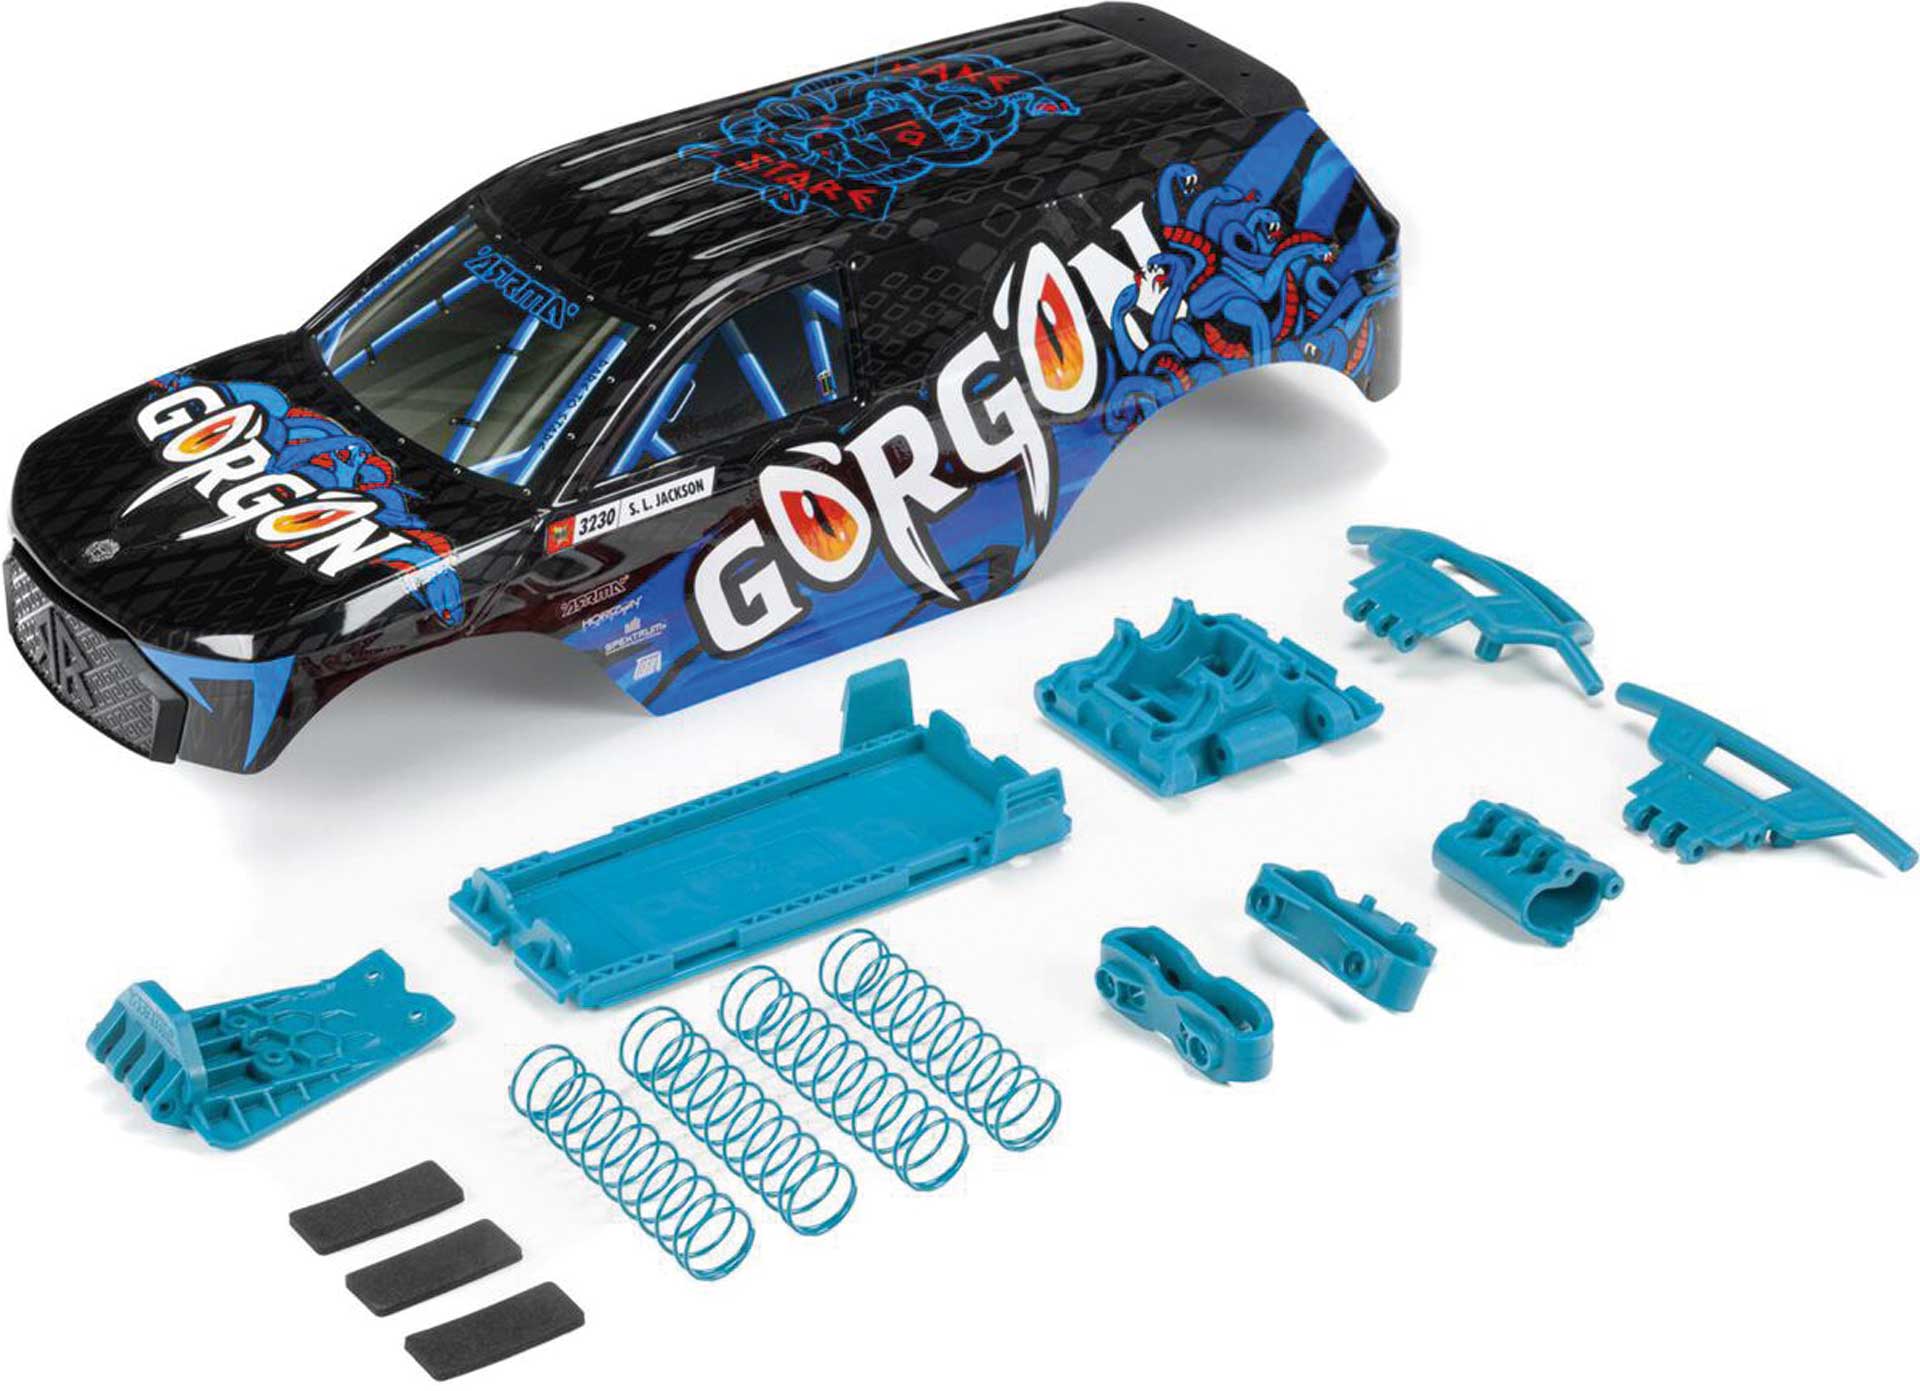 ARRMA GORGON body set with painted decals, Blue